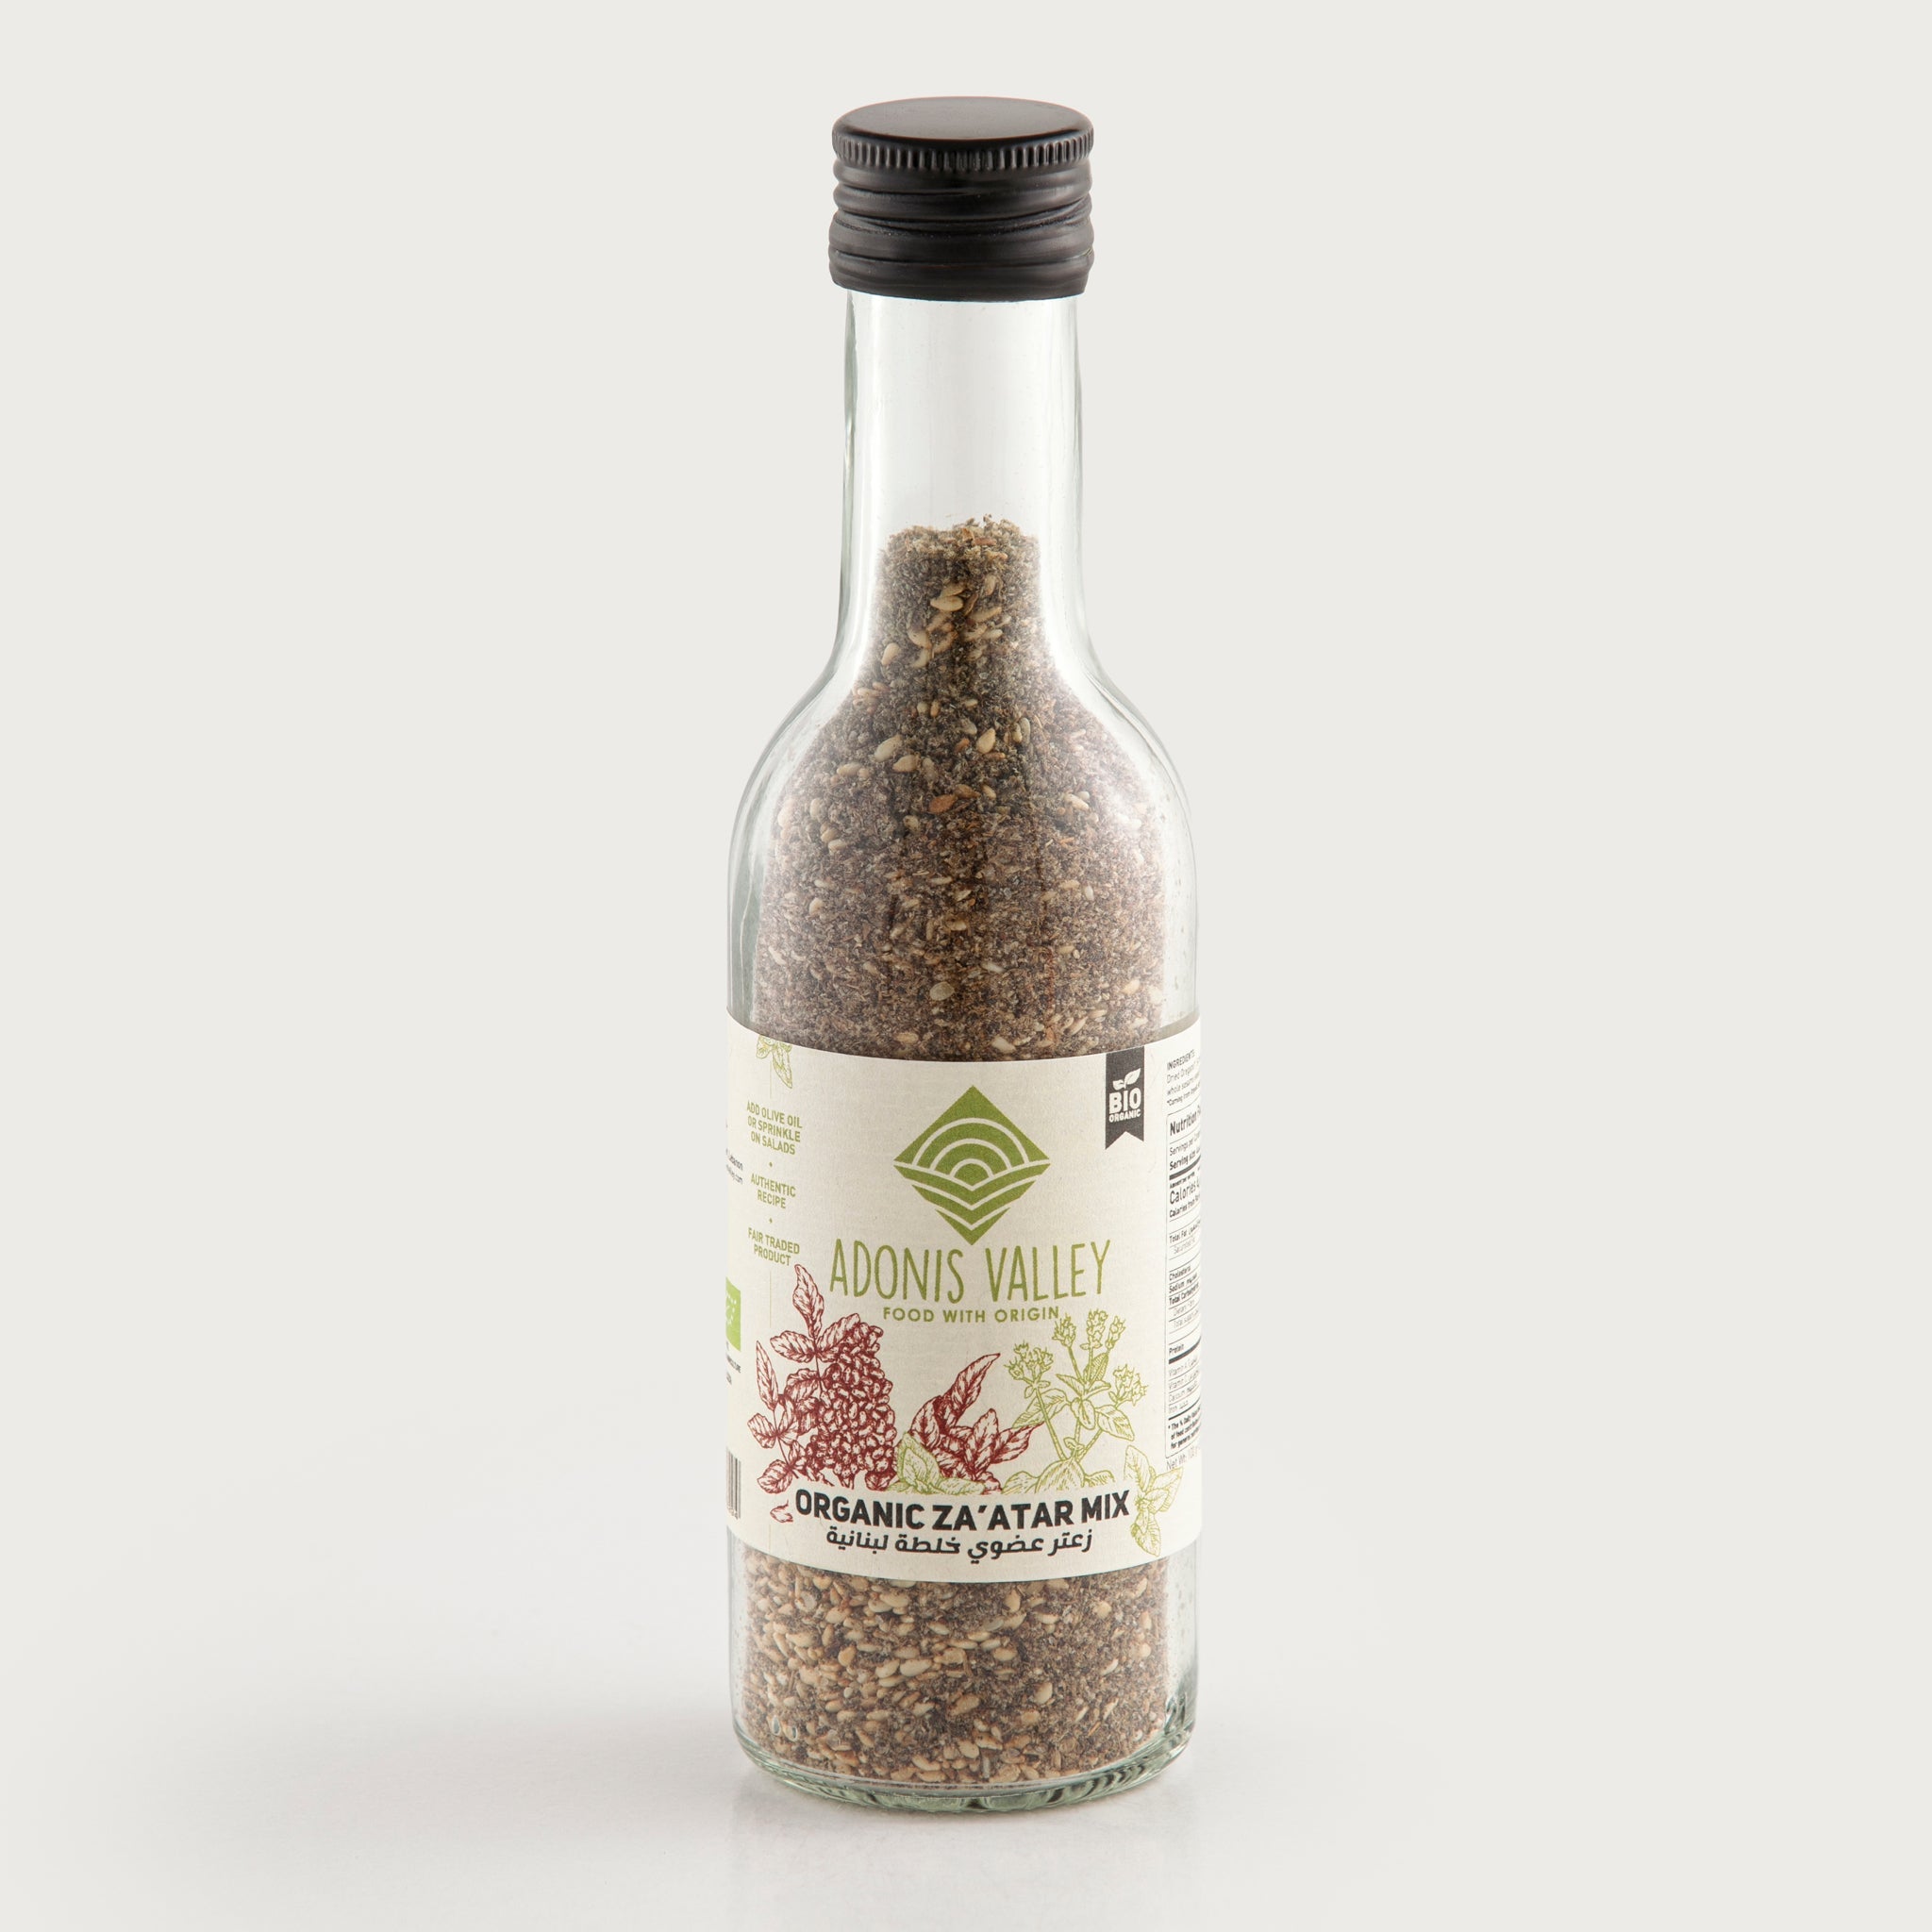 A bottle of organic Lebanese oregano by Adonis Valley